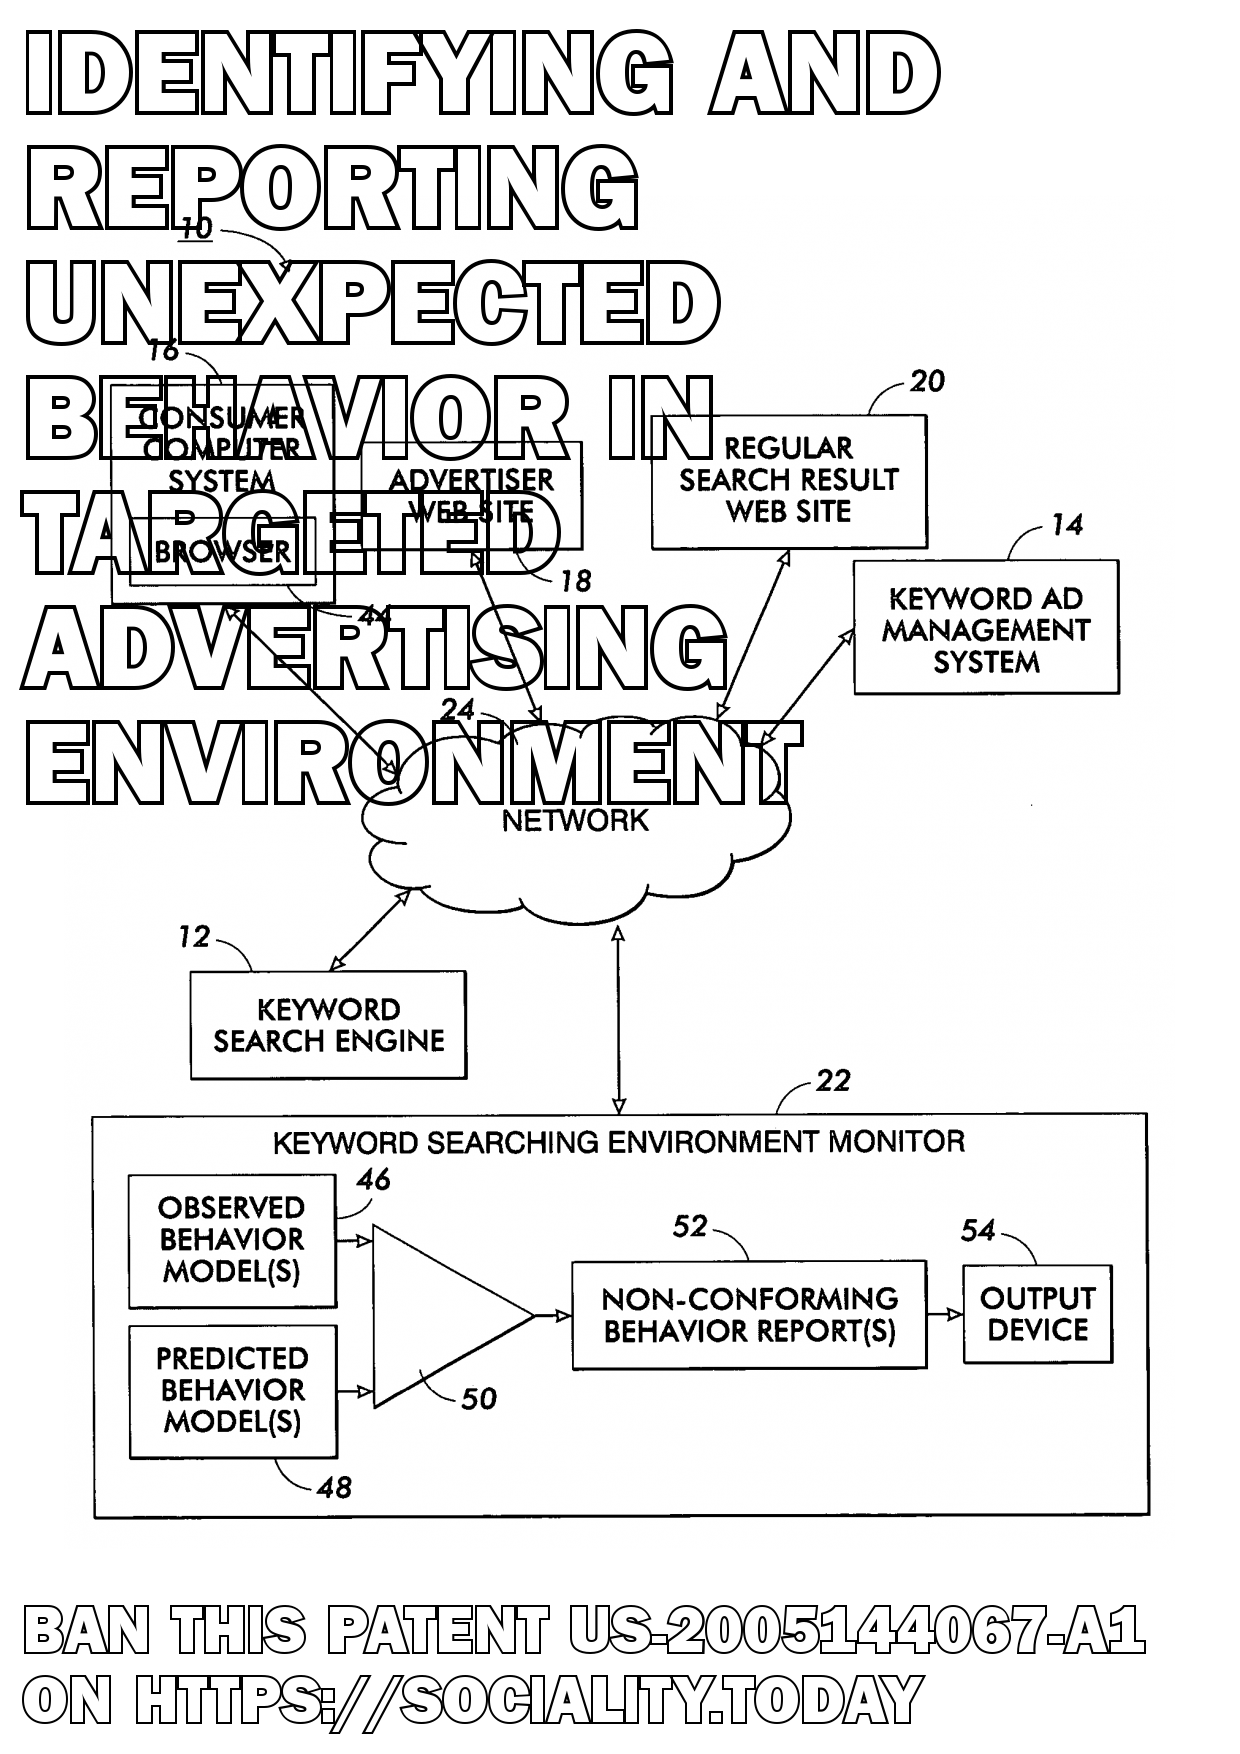 Identifying and reporting unexpected behavior in targeted advertising environment  - US-2005144067-A1